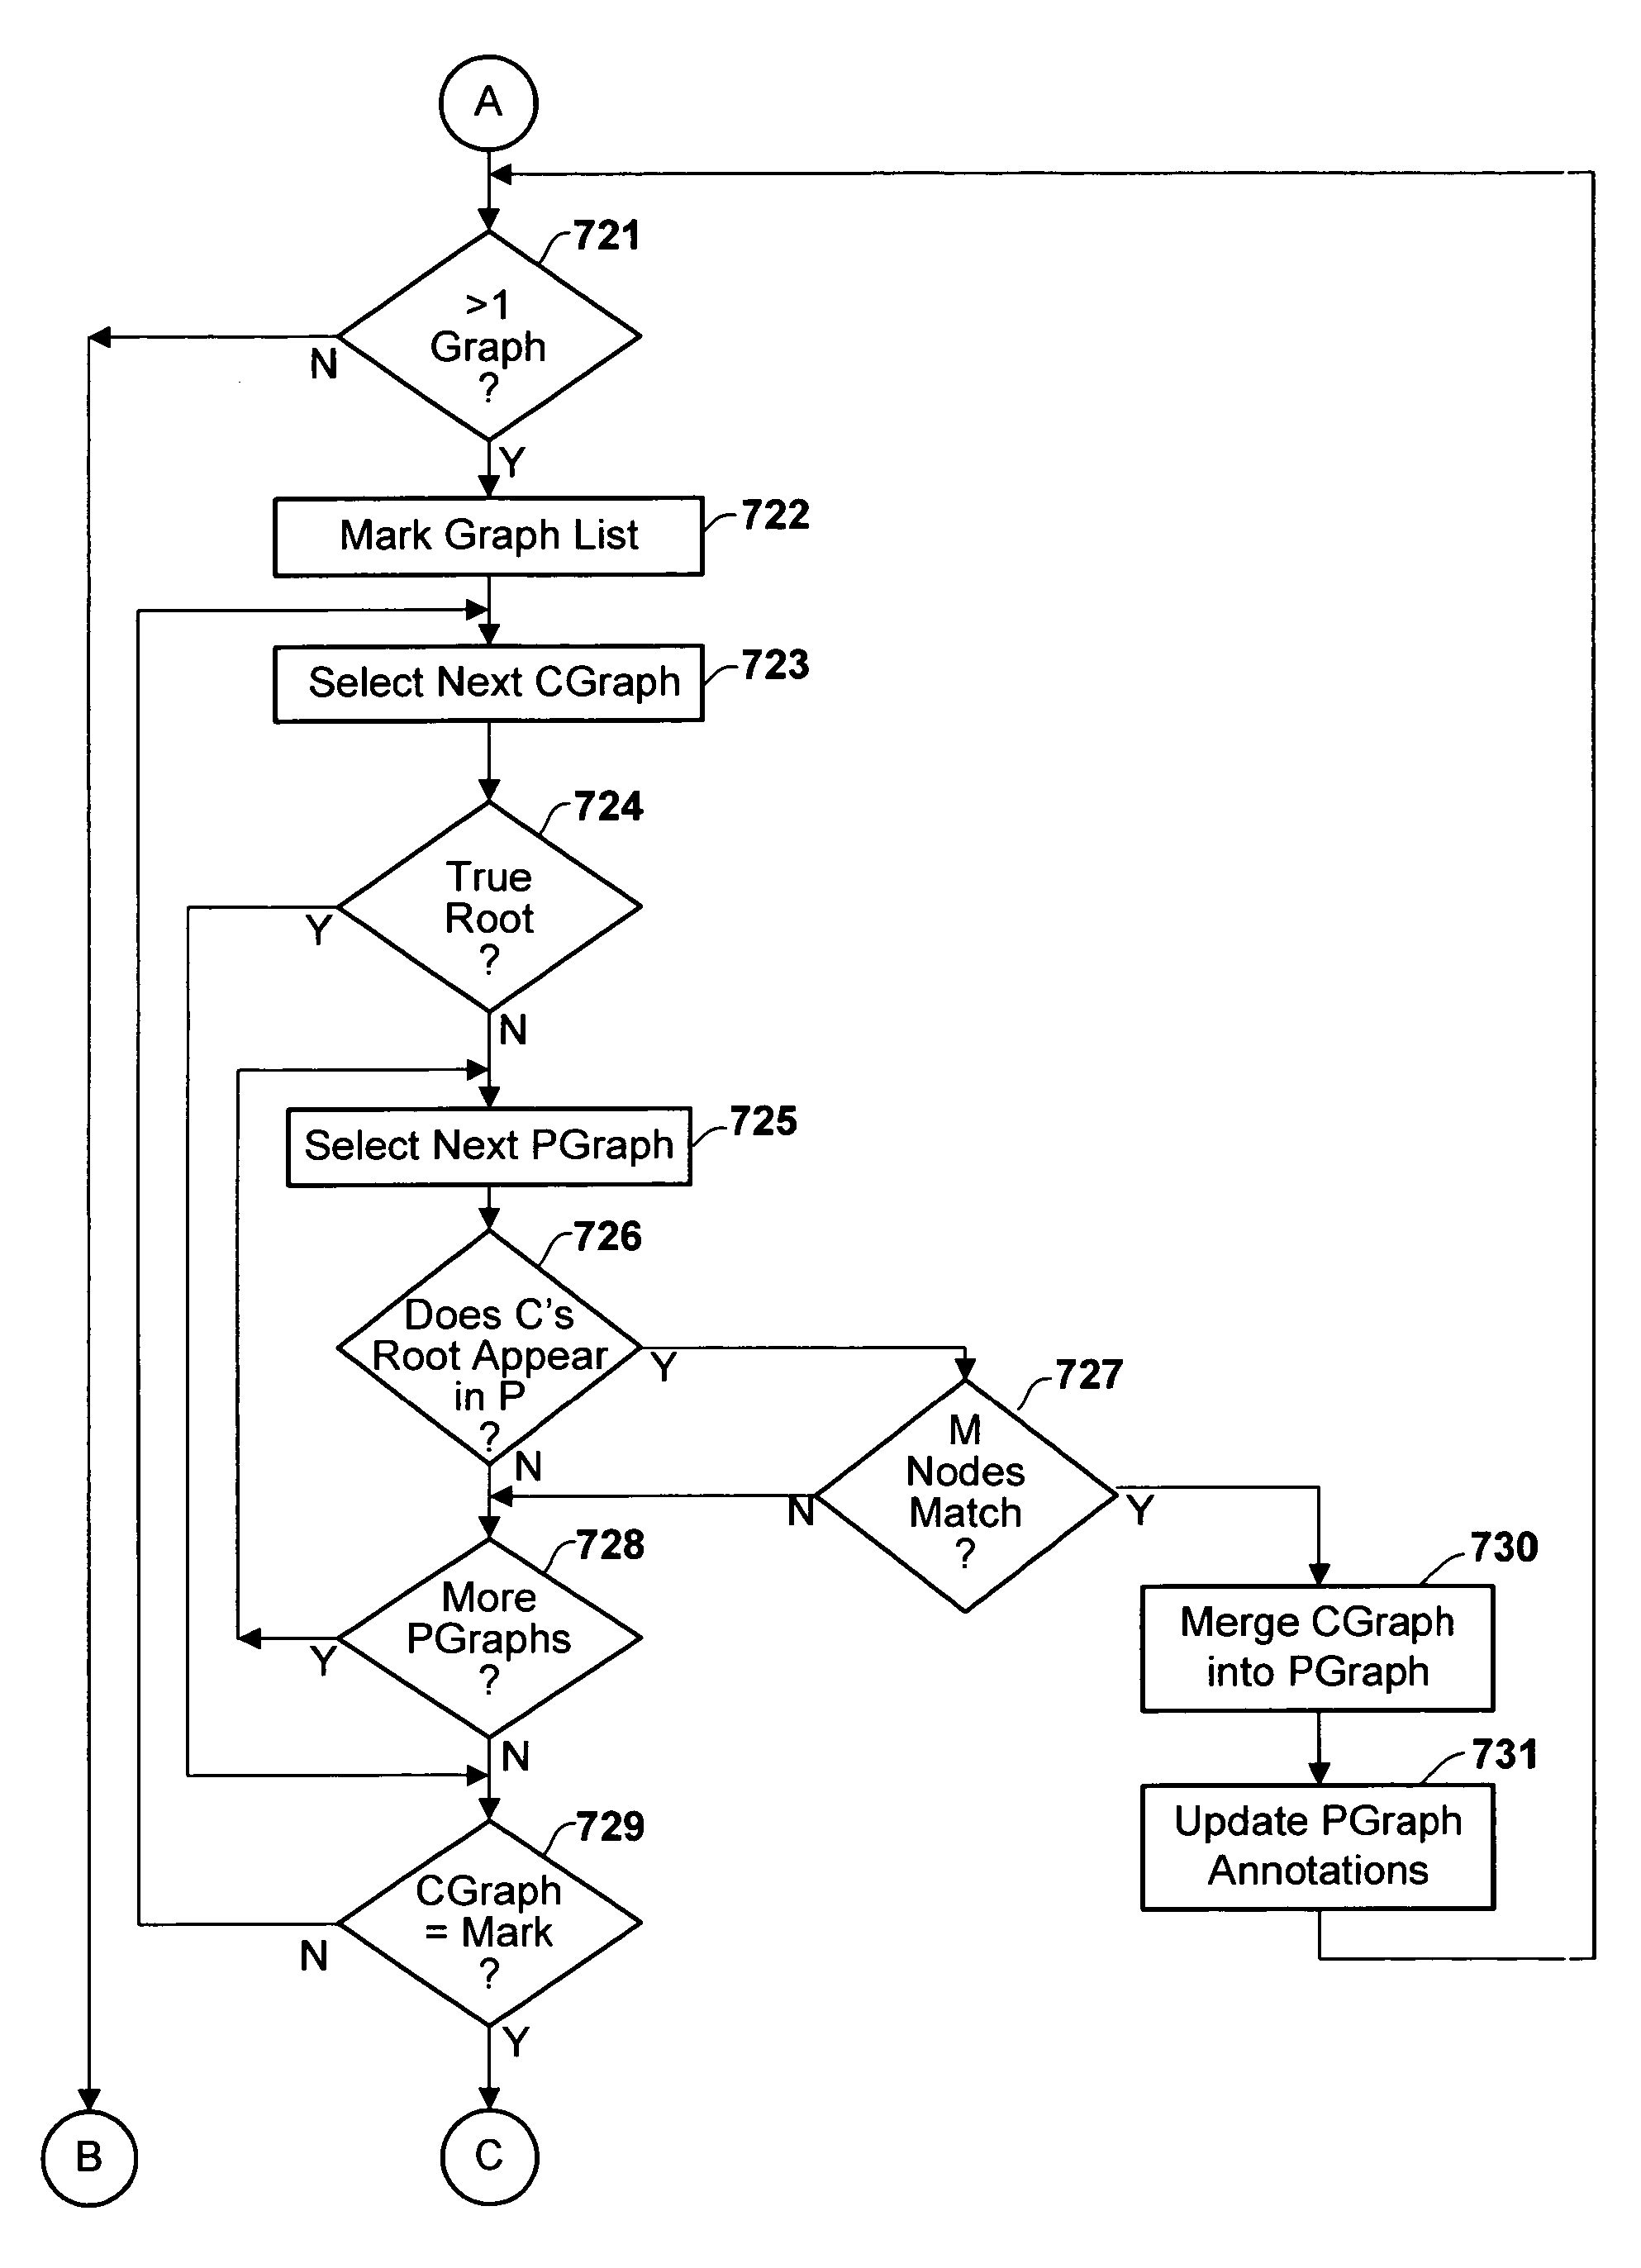 Method and apparatus for analyzing call history data derived from execution of a computer program